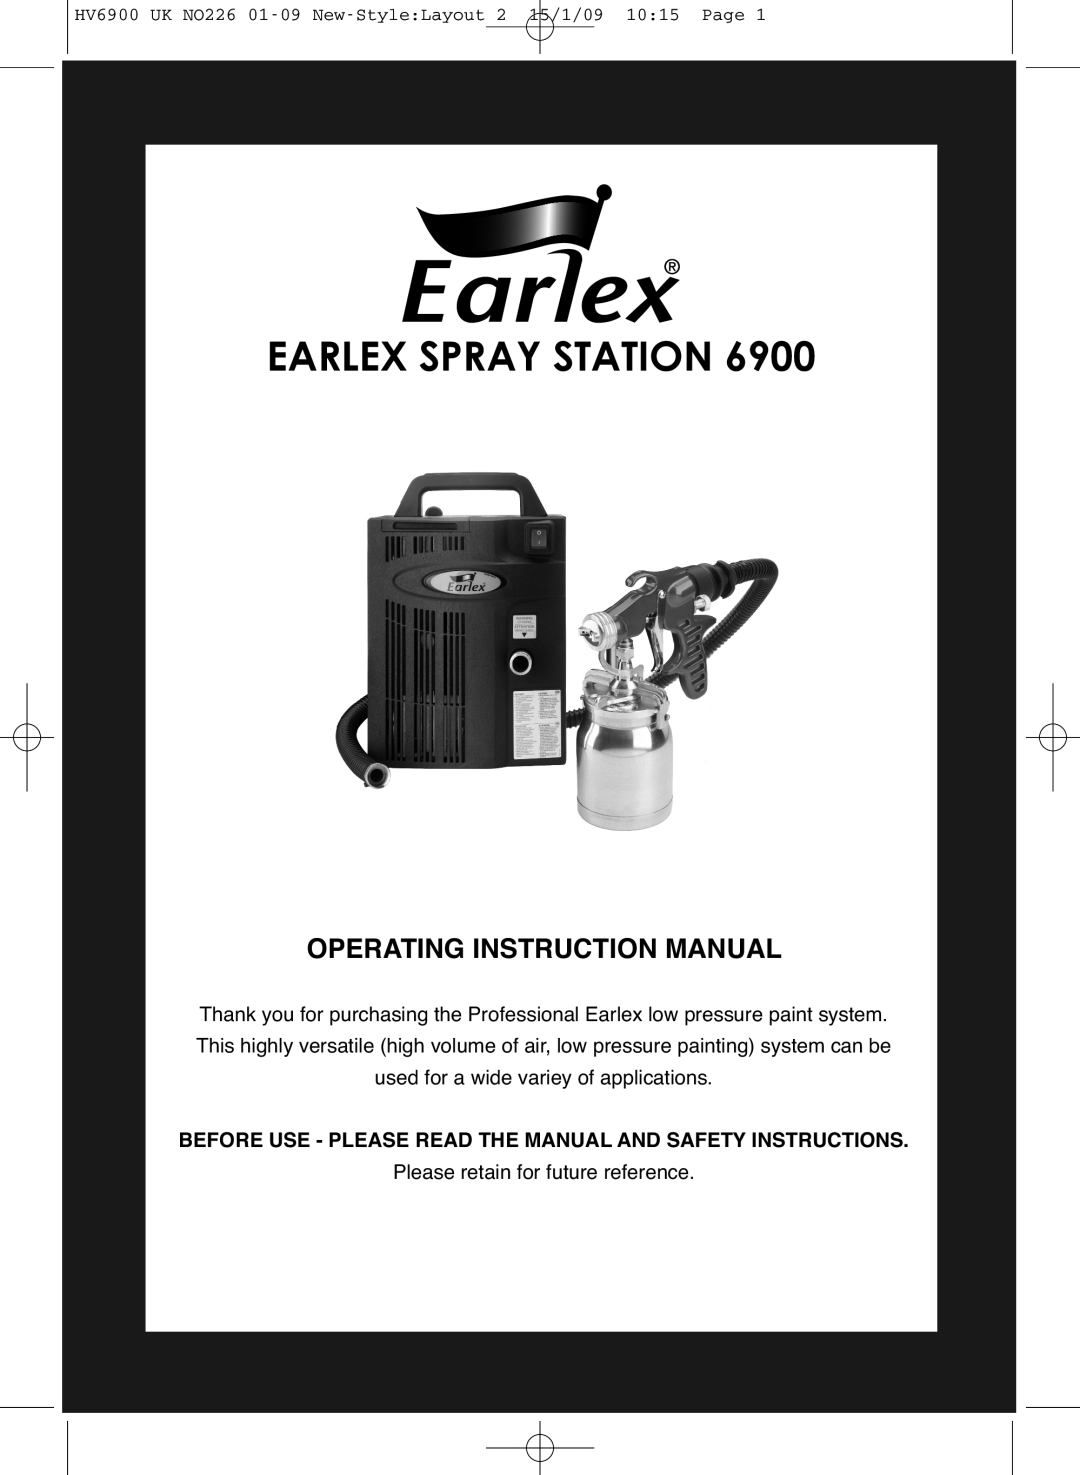 Earlex 6900 instruction manual Before Use - Please Read The Manual And Safety Instructions, Earlex Spray Station 